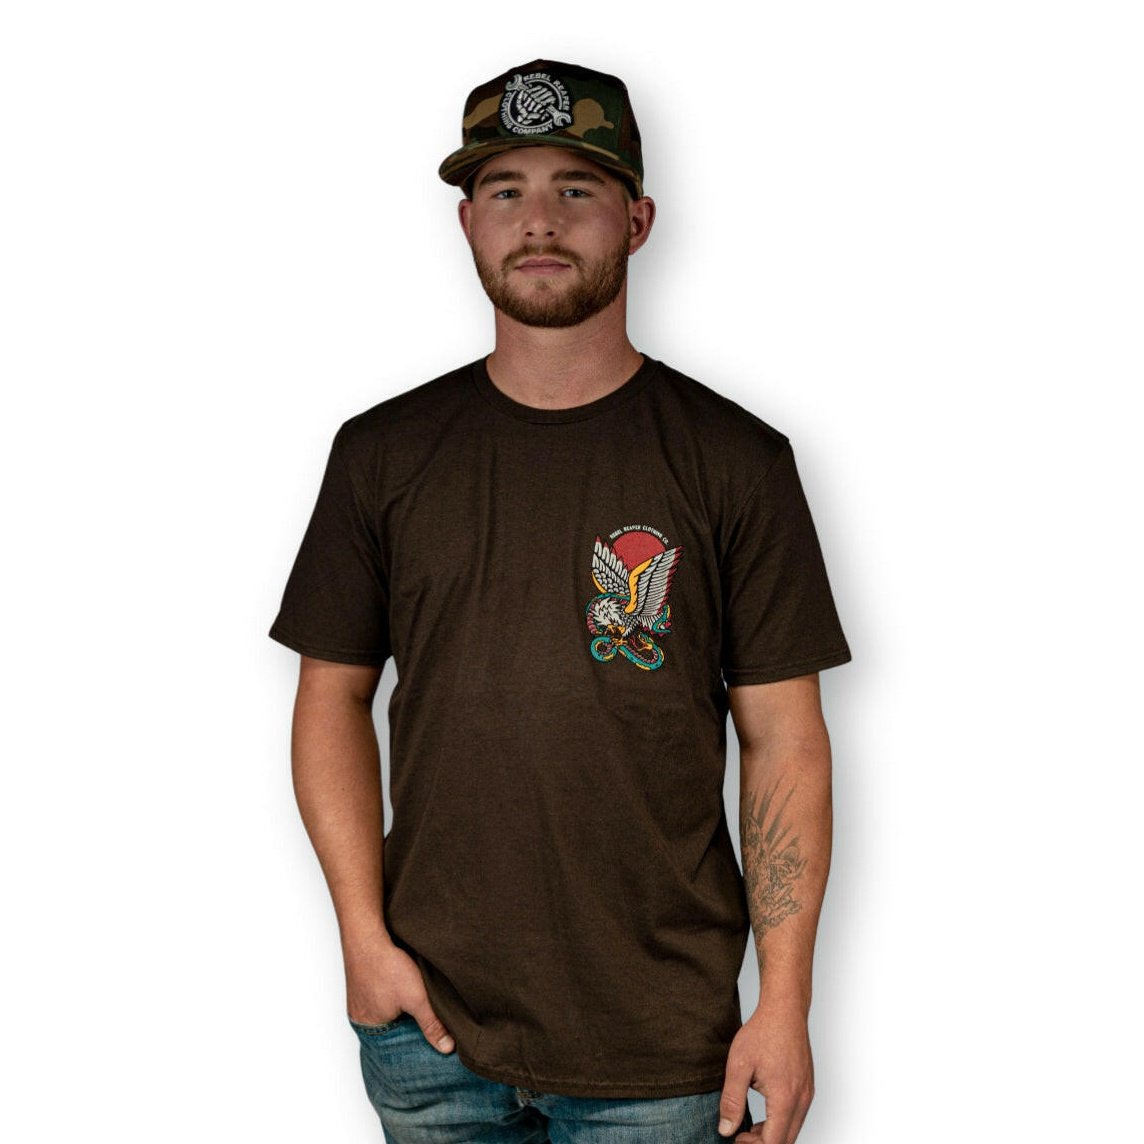 Only the Strong Survive Brown T-Shirt - Rebel Reaper Clothing Company T-Shirt